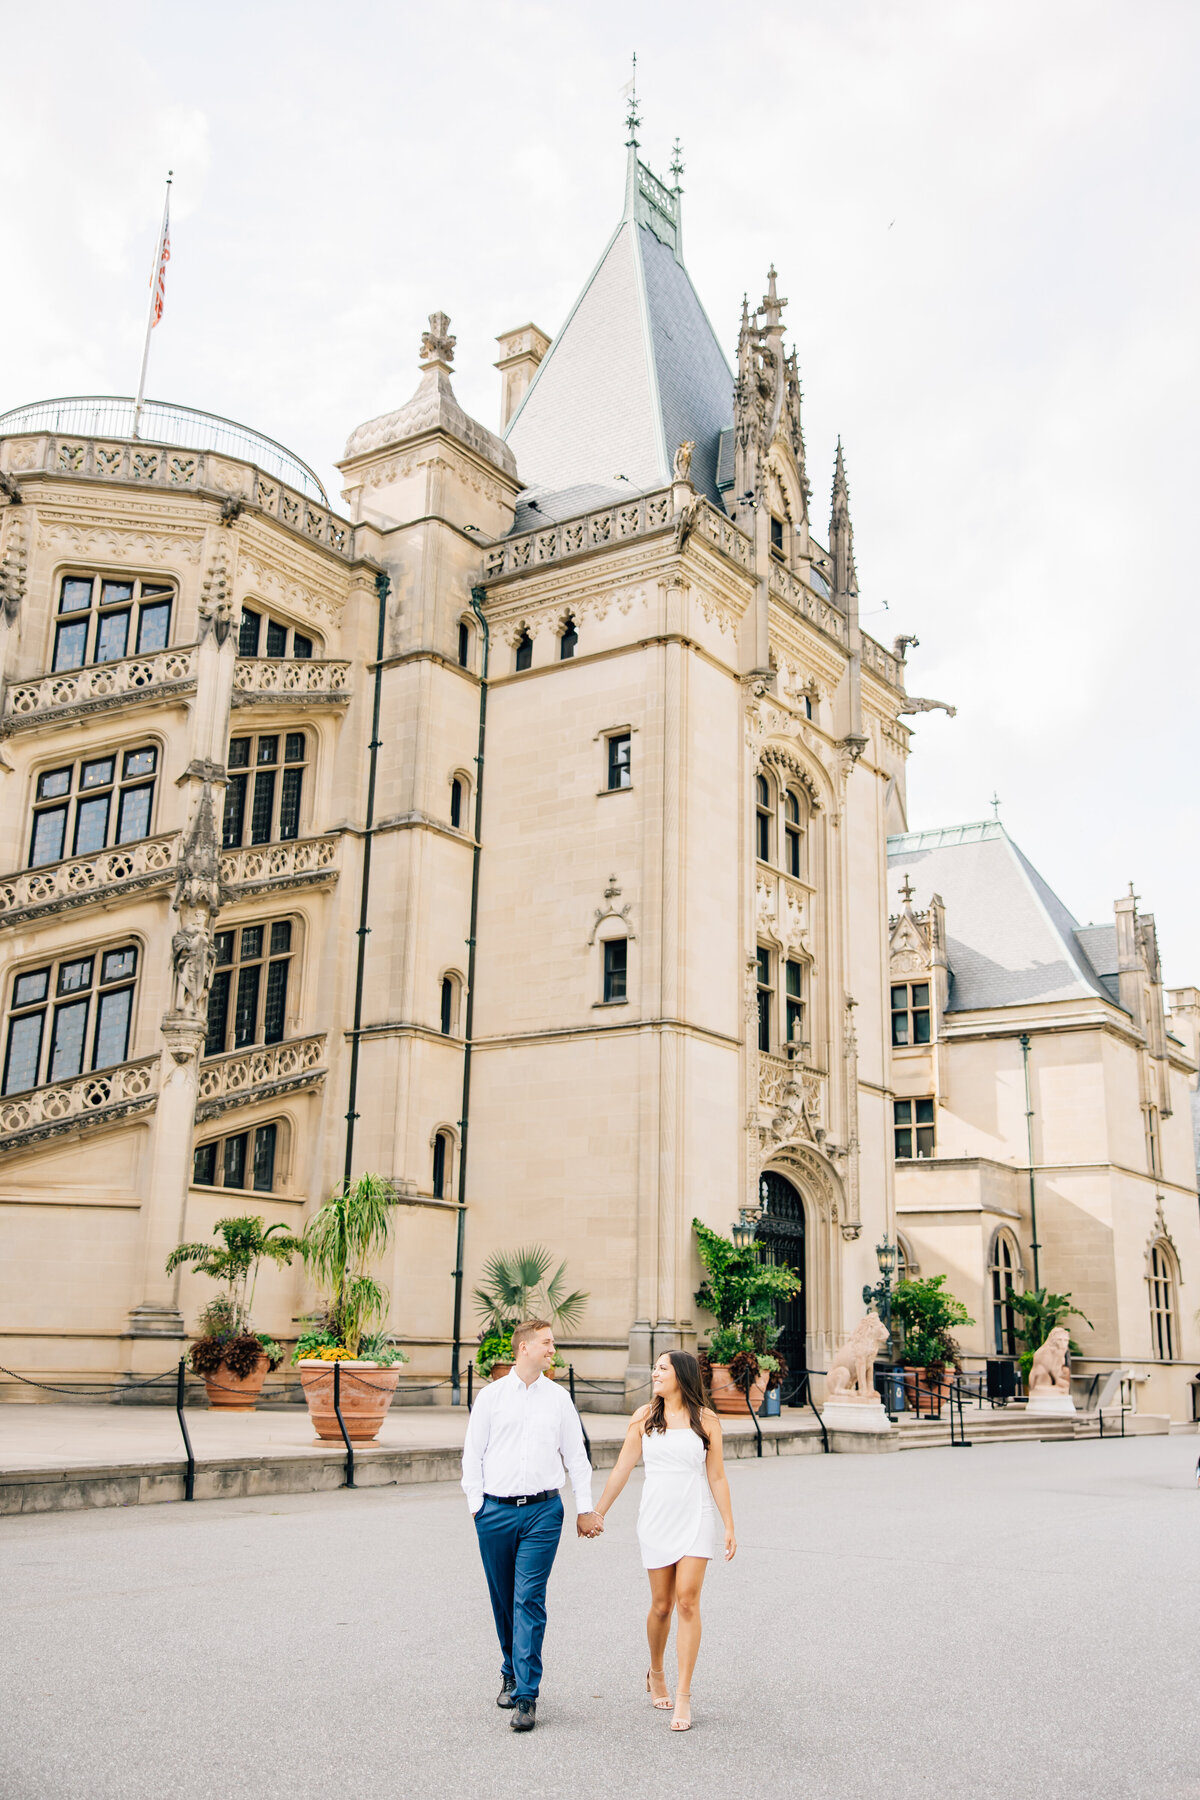 Jessica & Ryan Engagements at Biltmore Estate - Tracy Waldrop Photography-13